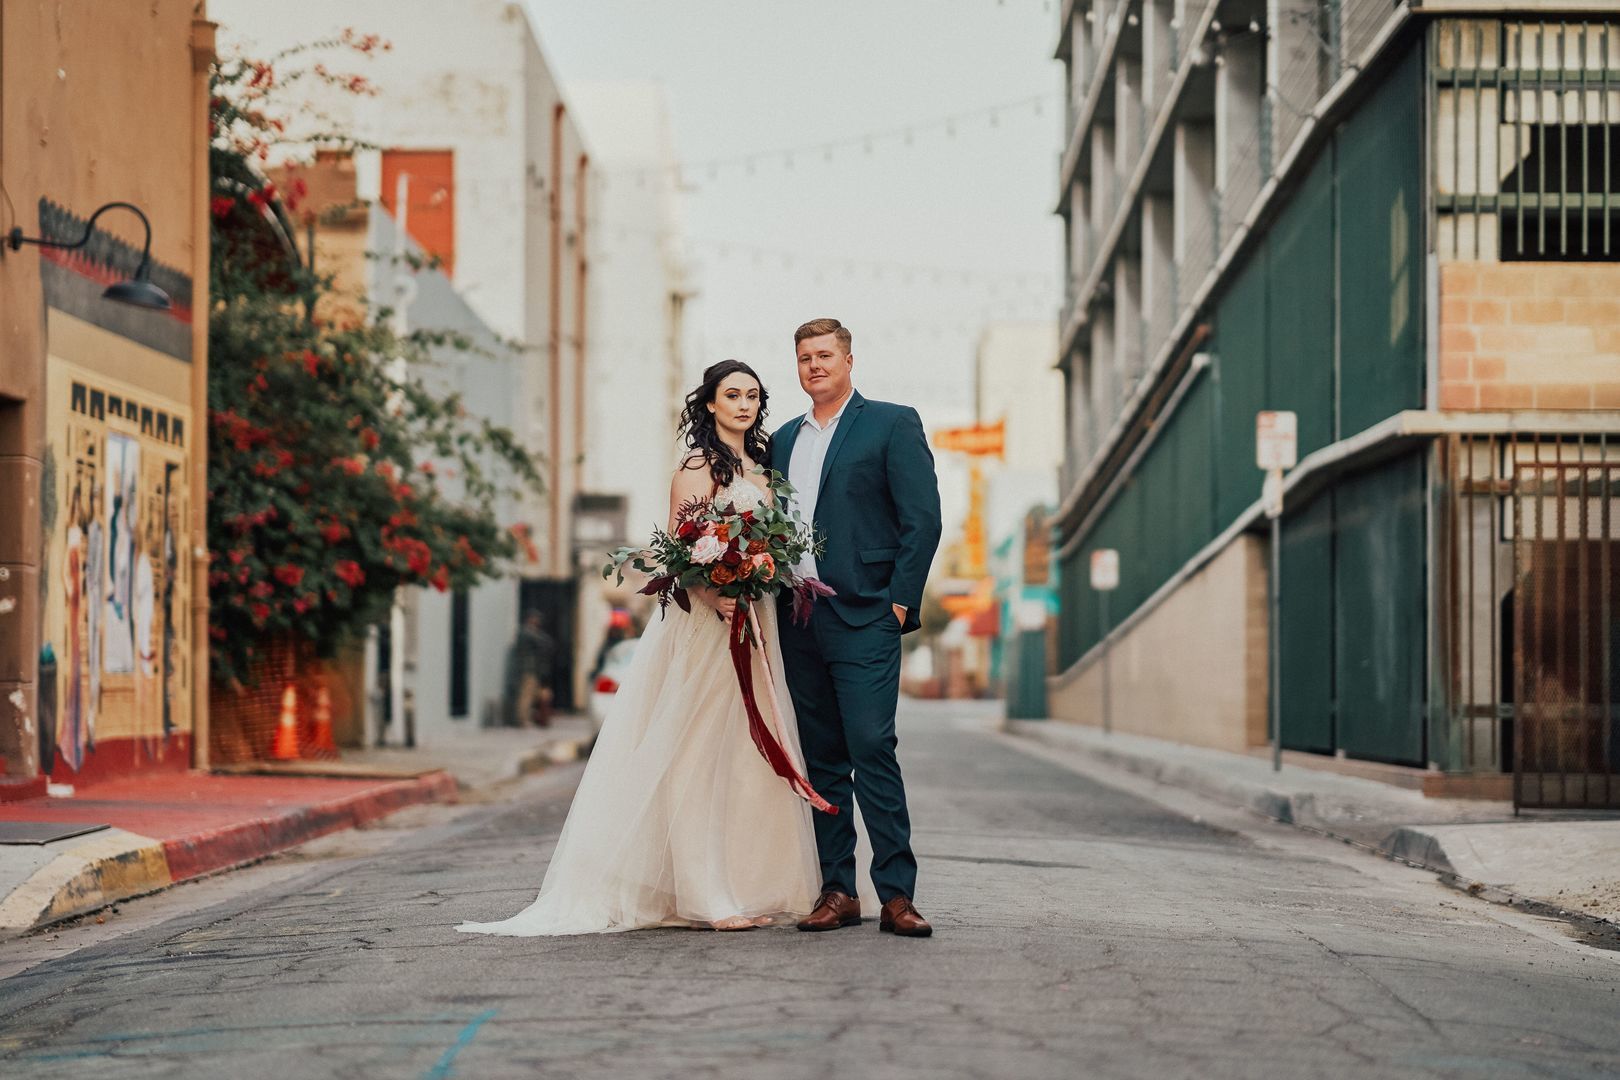 Weddings 2022 a Wedding and Event Expo, Bakersfield, California, United States